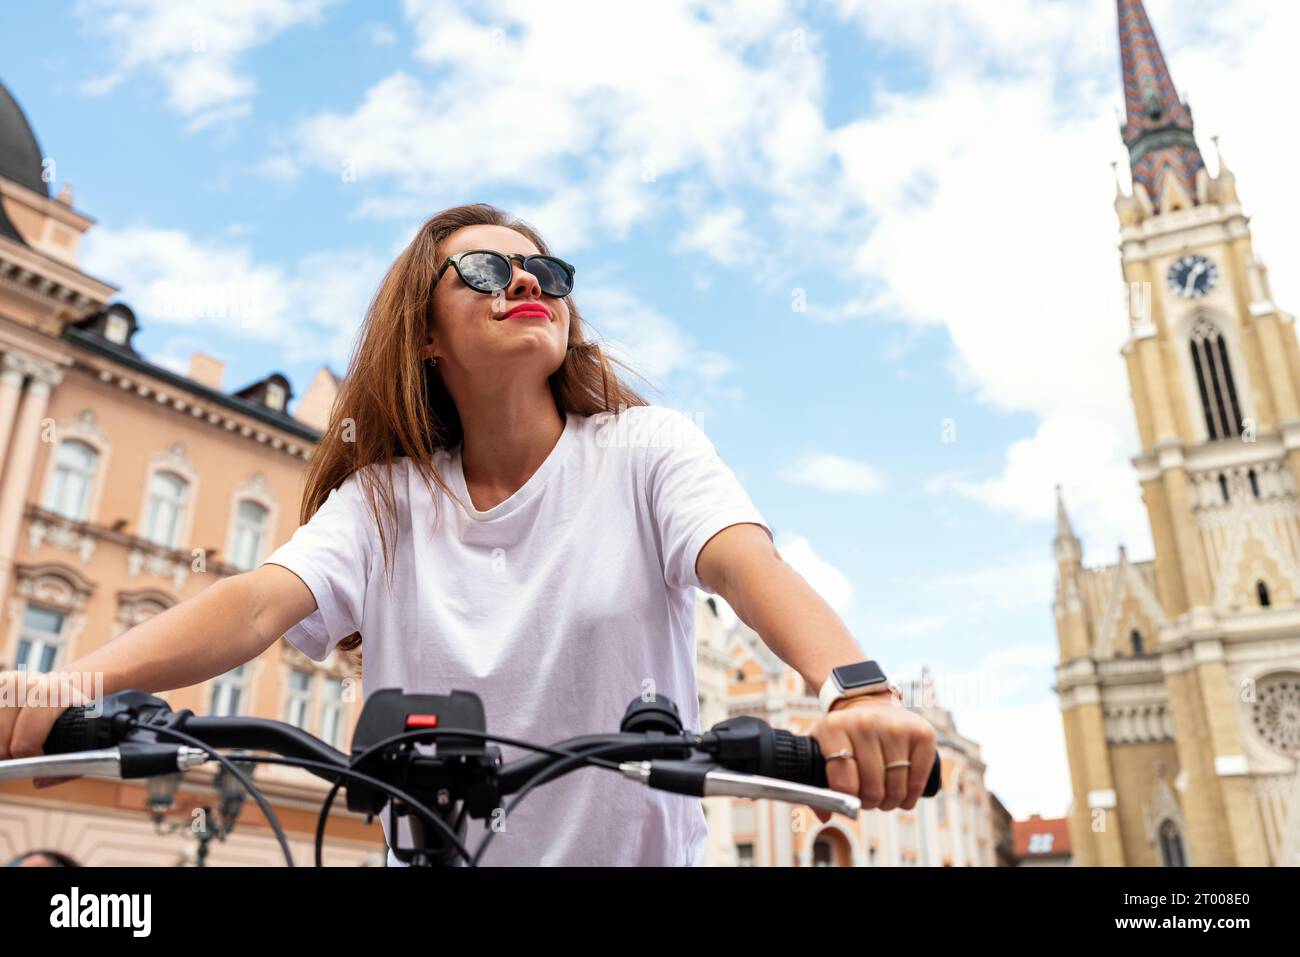 Brunette woman wearing sunglasses riding a bike, bicycle travel tour around historic place in Novi Sad, Serbia. Stock Photo